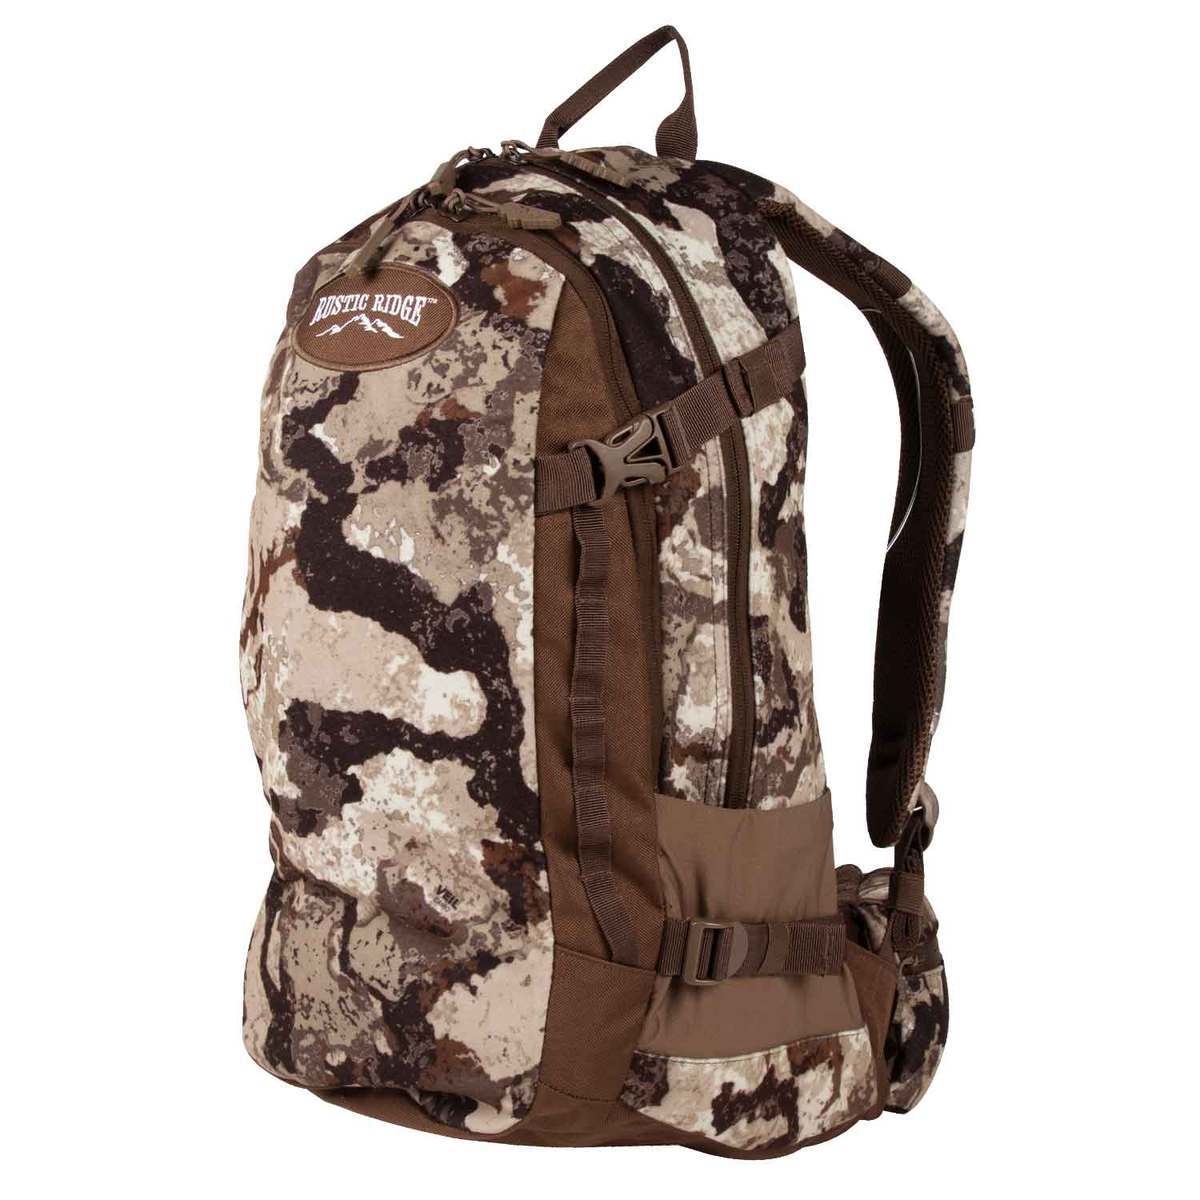 Rustic Ridge 2000 Camo 32 Liter Hunting Pack - Cervidae by Sportsman's Warehouse